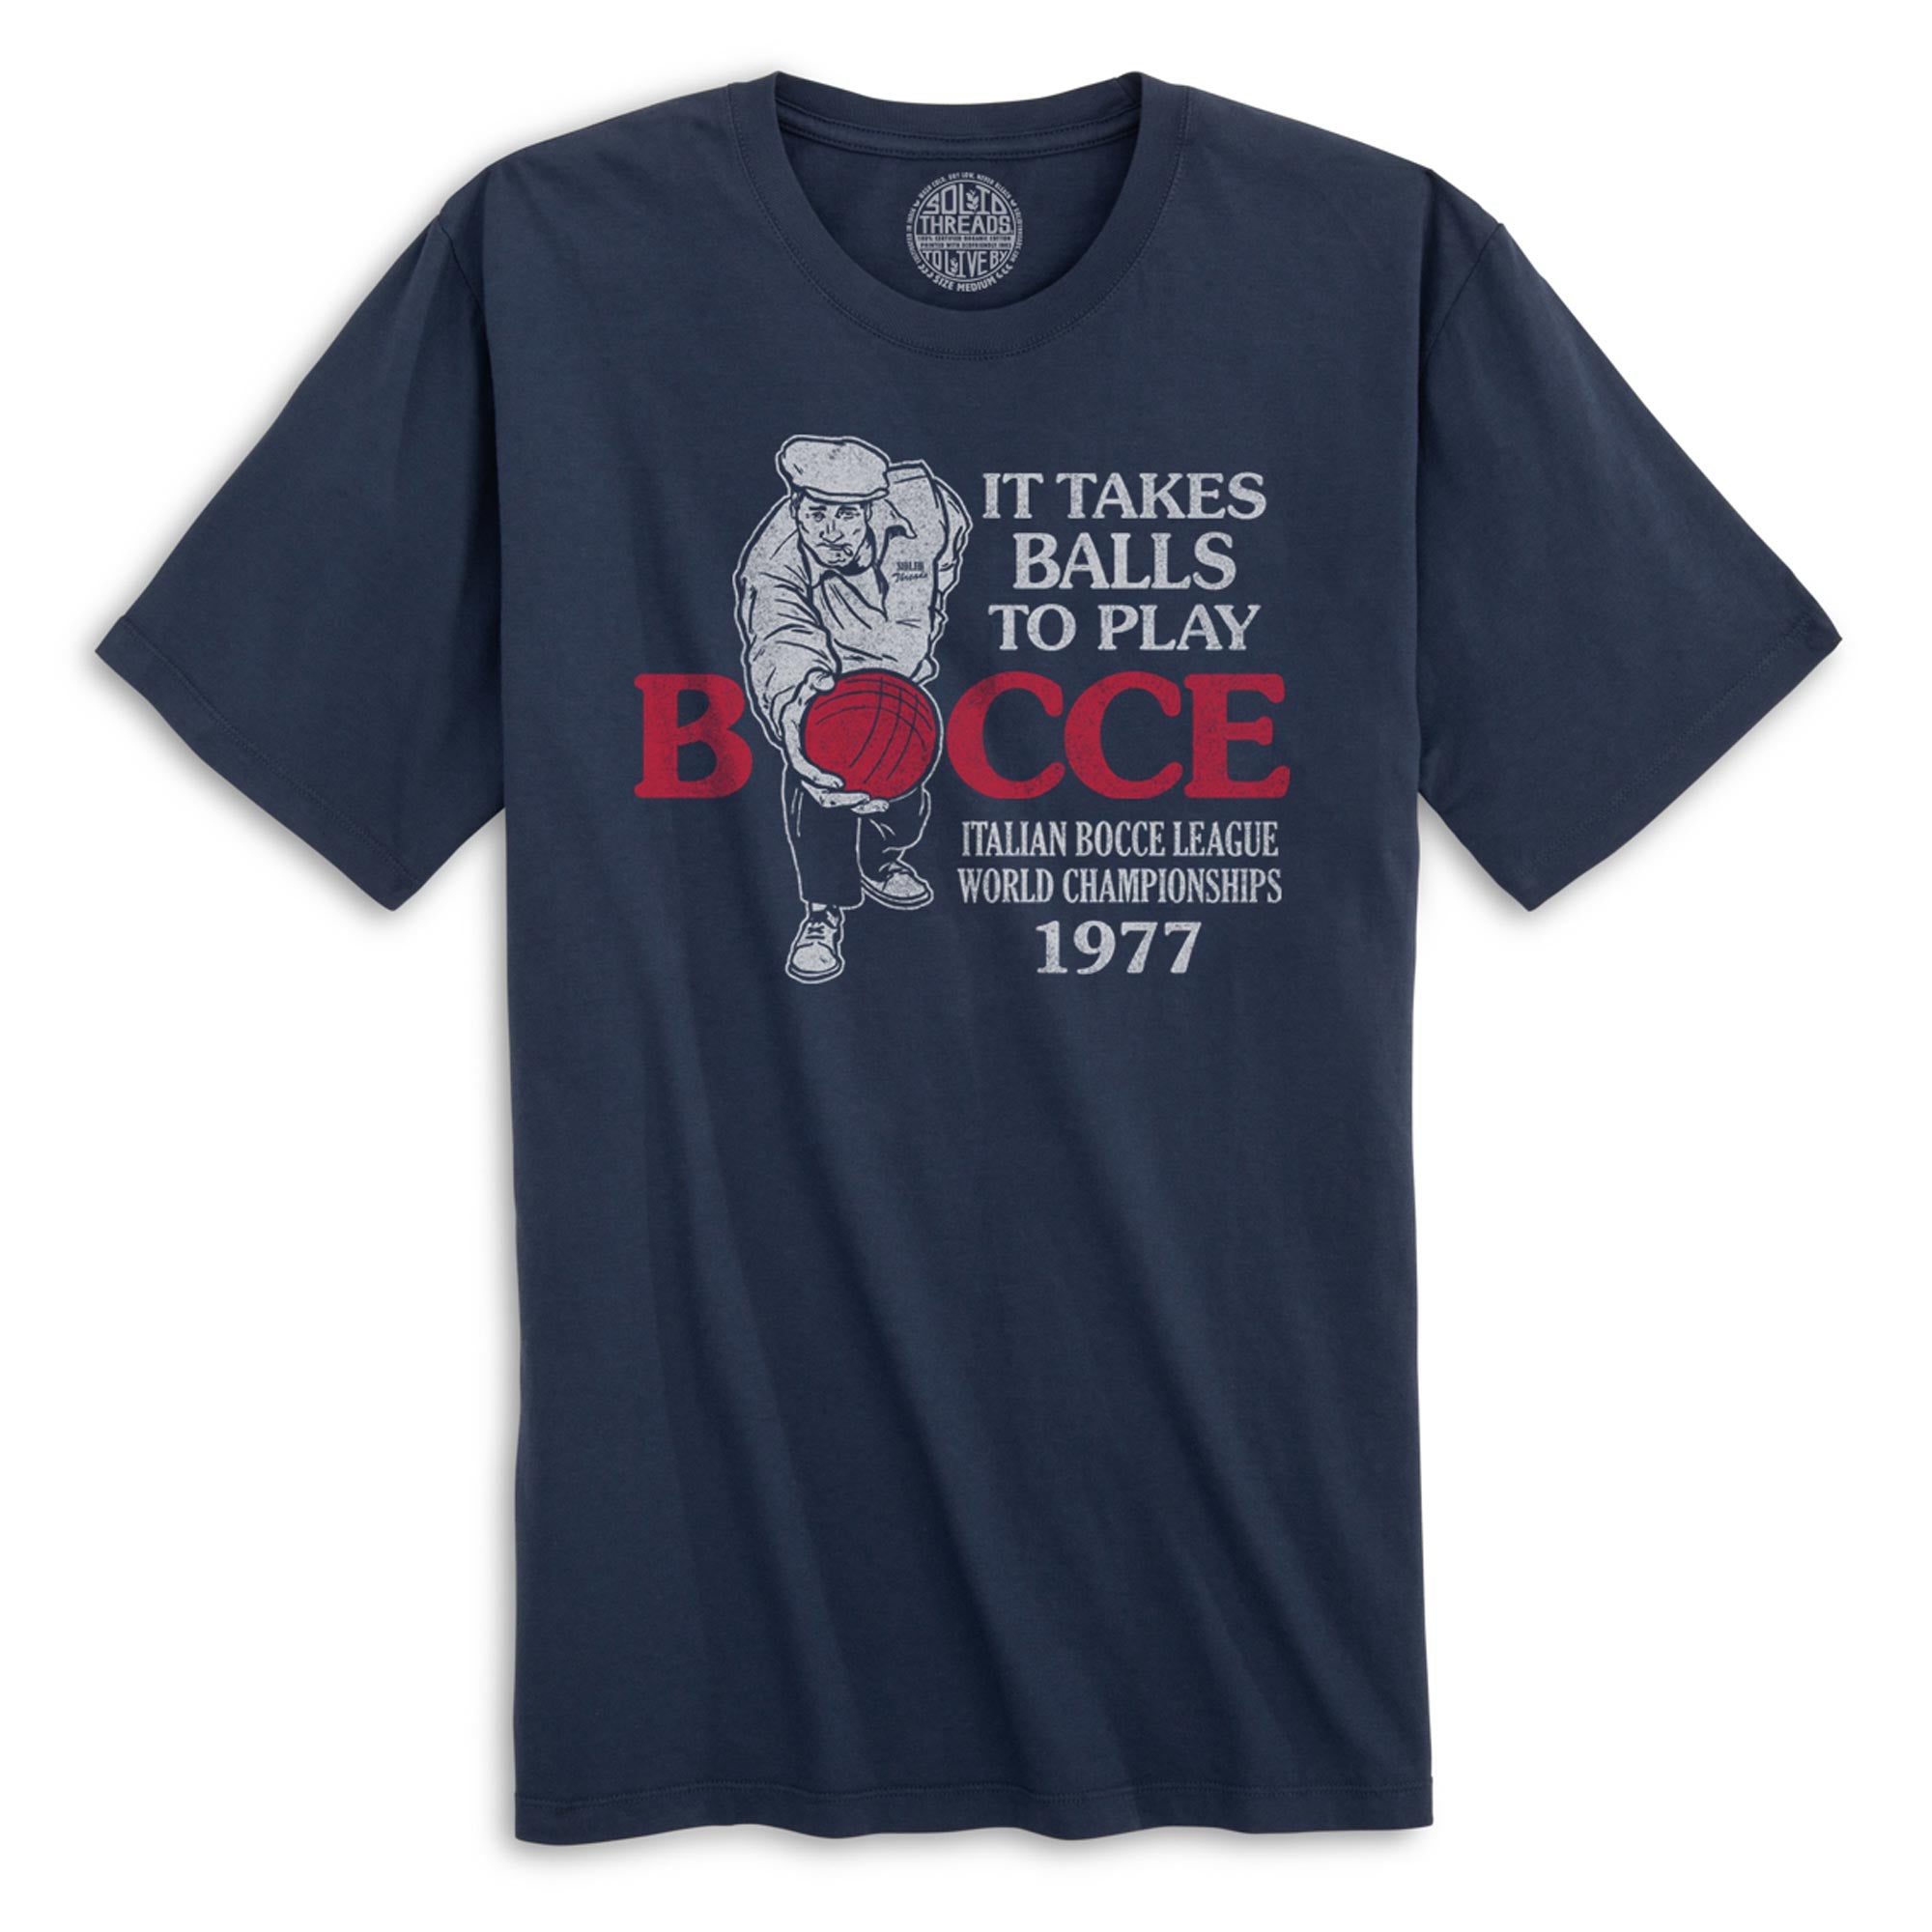 It Takes Balls To Play Bocce Funny Organic Cotton T-shirt | Vintage Sports Tee | Solid Threads